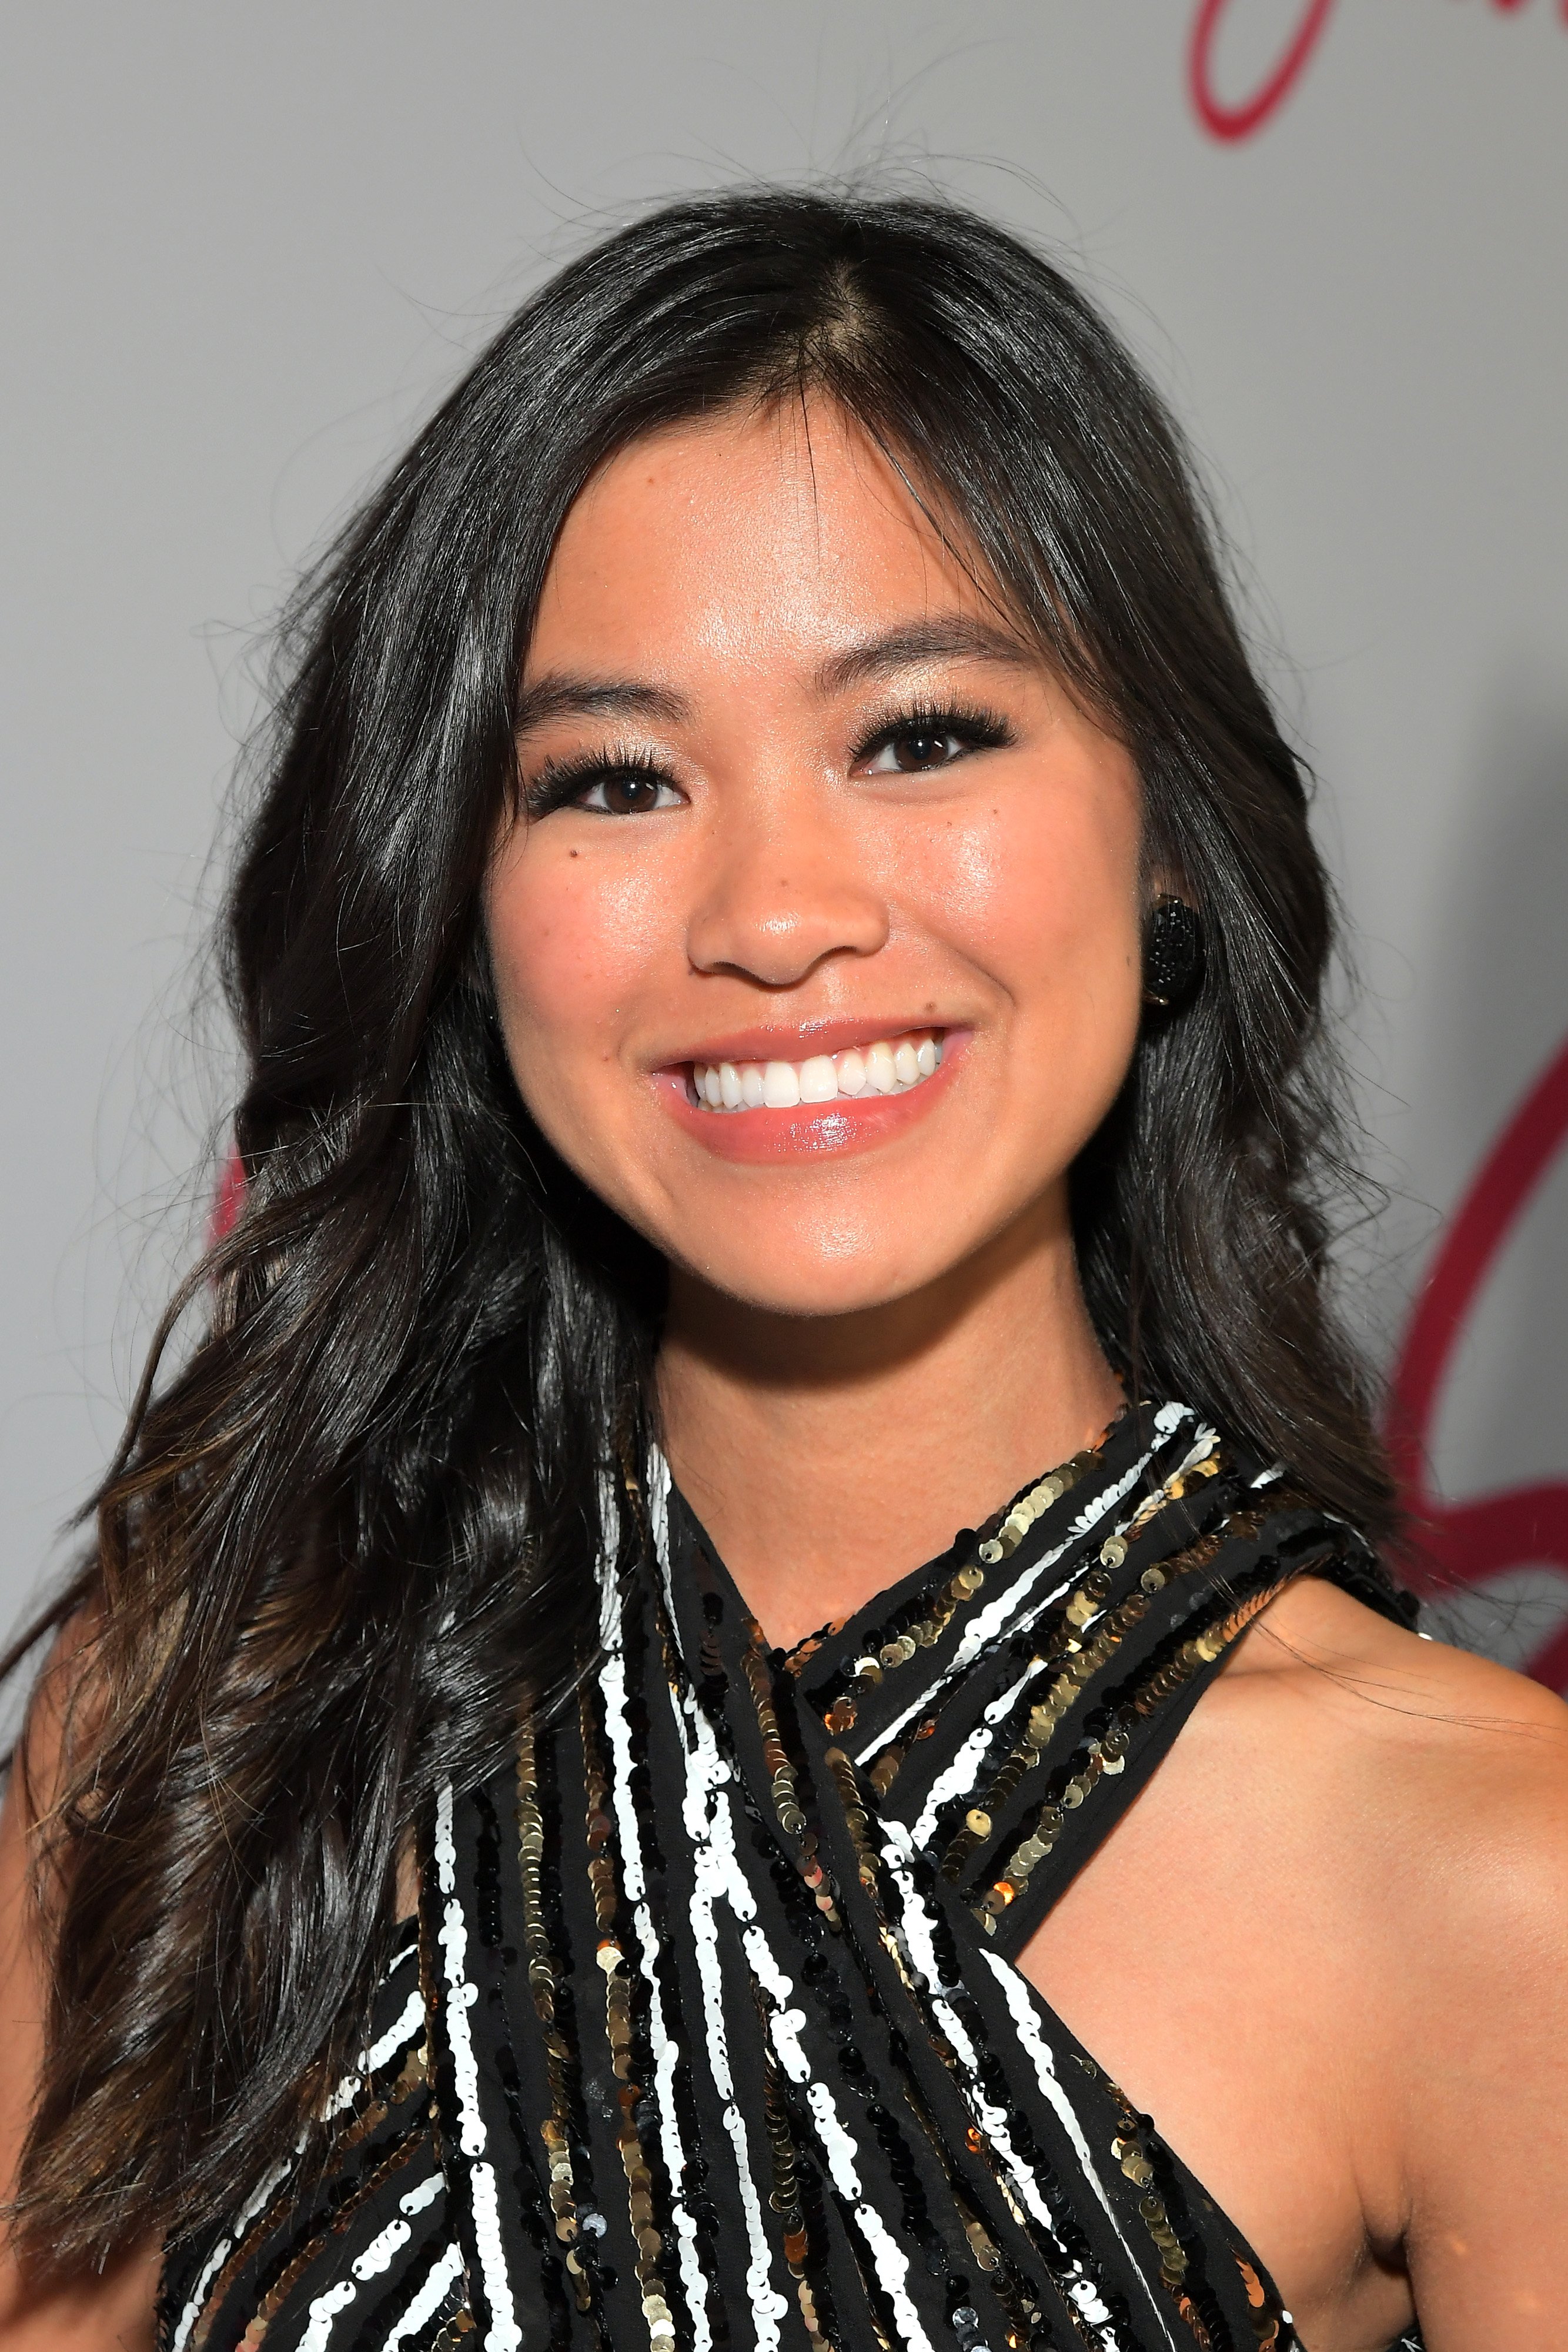 Tiffany Espensen is photographed arriving at the premiere of 'Let it Snow' in November 2019